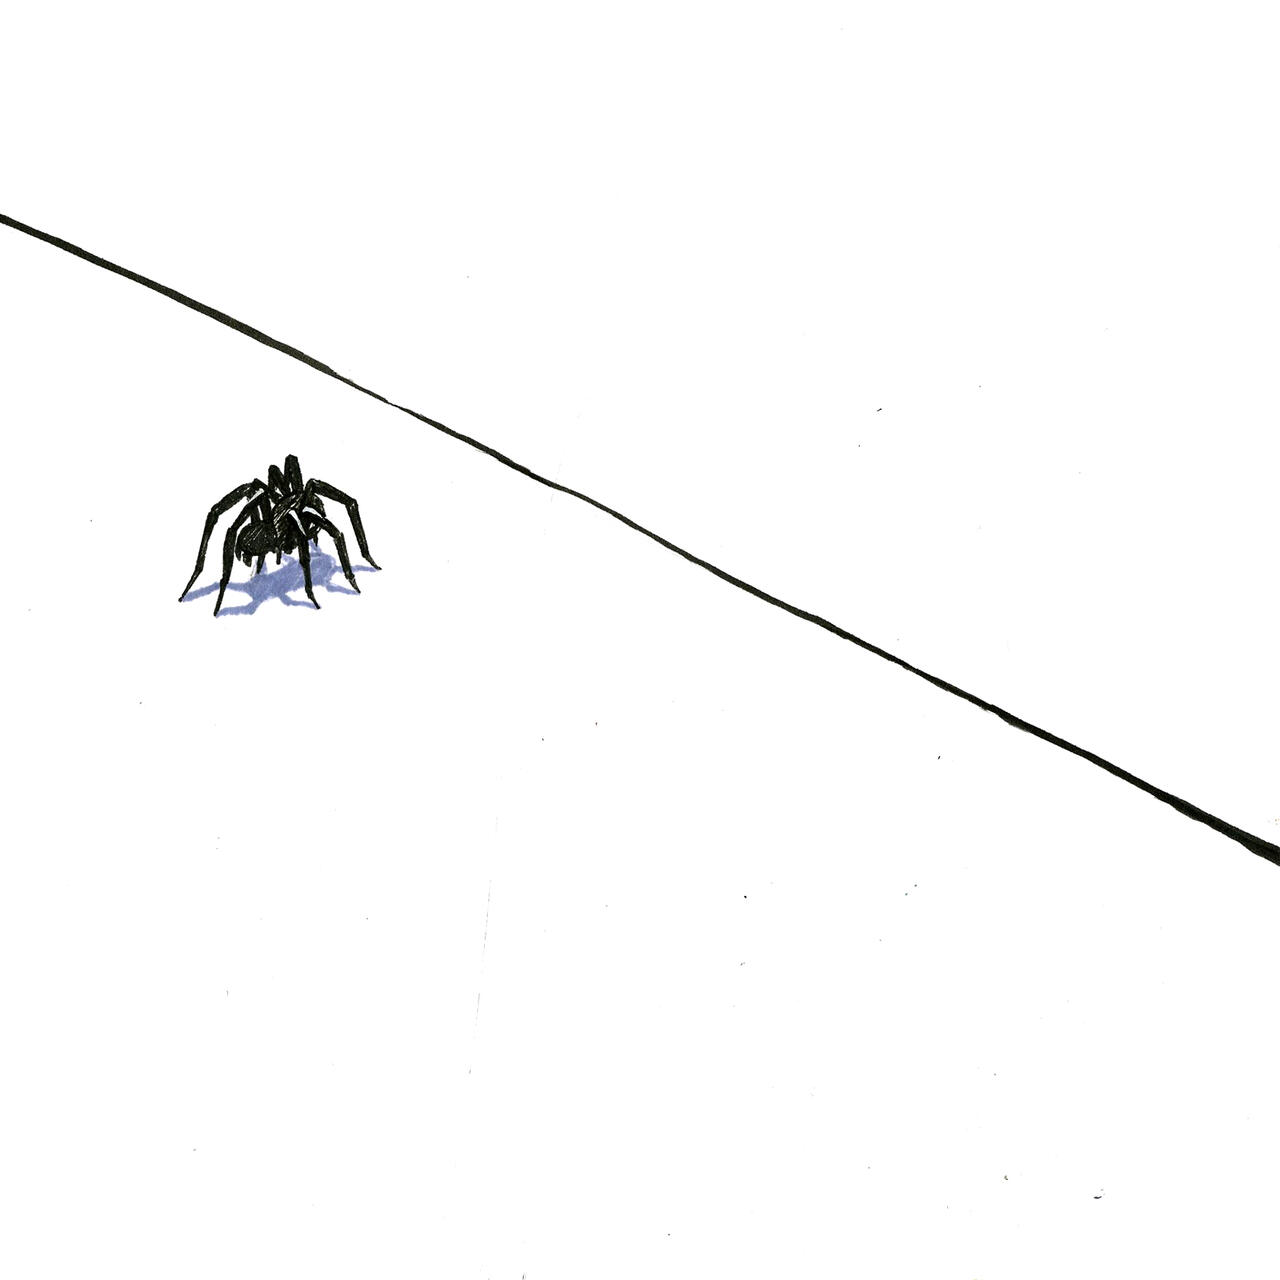 Conceptual spider illustration by Emily Augustin